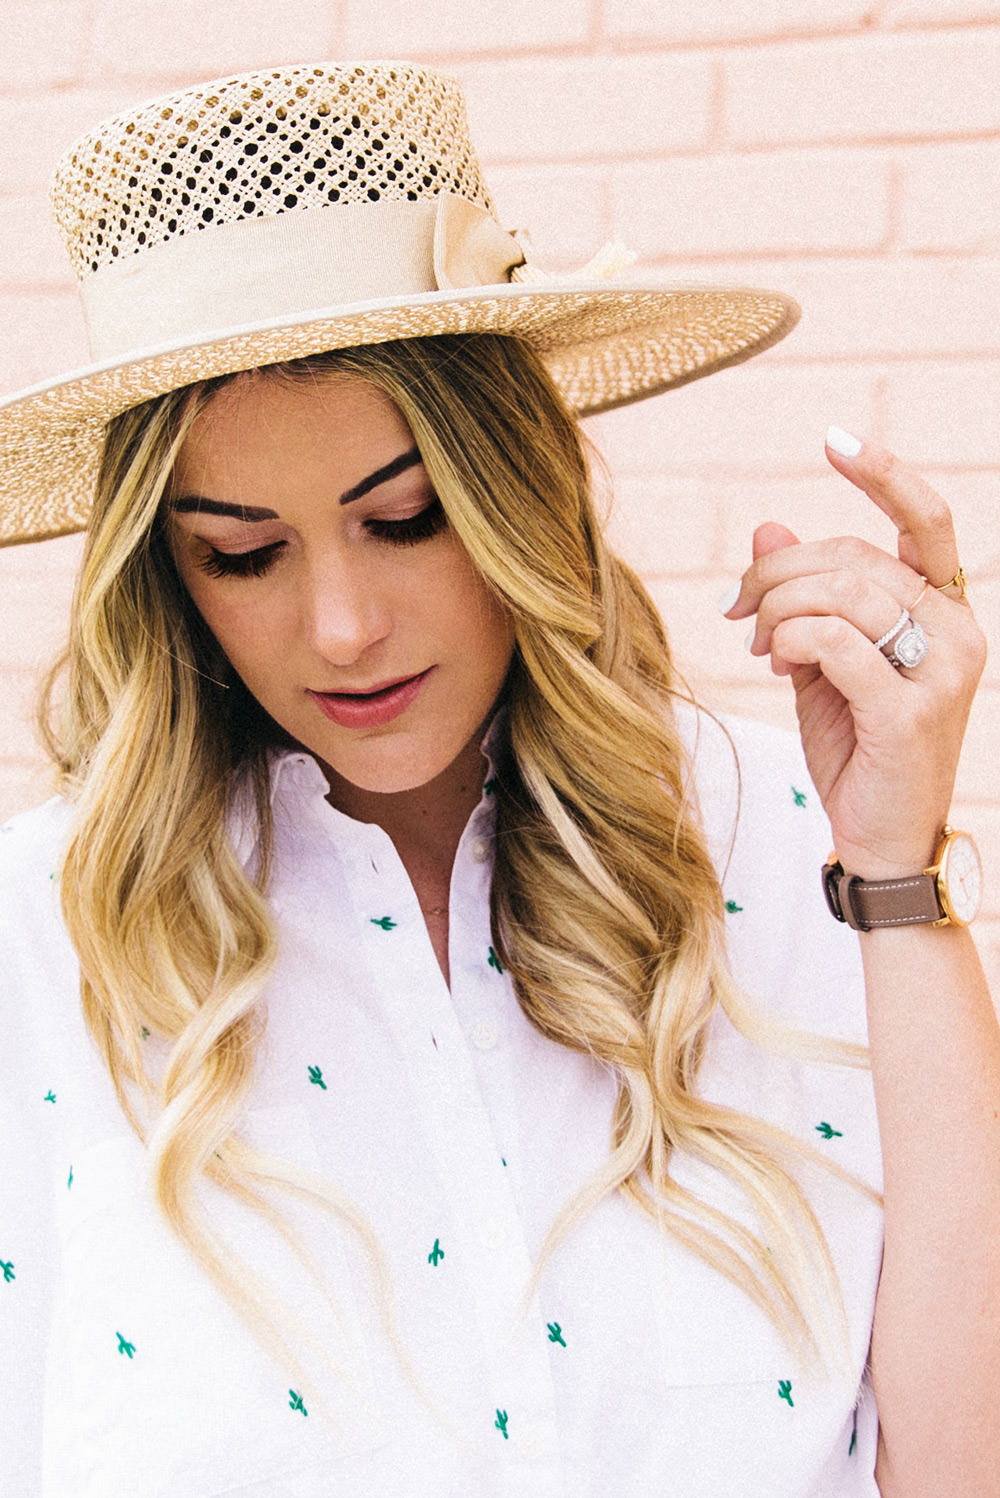 Caitlin Lindquist of Dash of Darling shares an all white outfit for Spring with a cactus shirt and a boater hat.